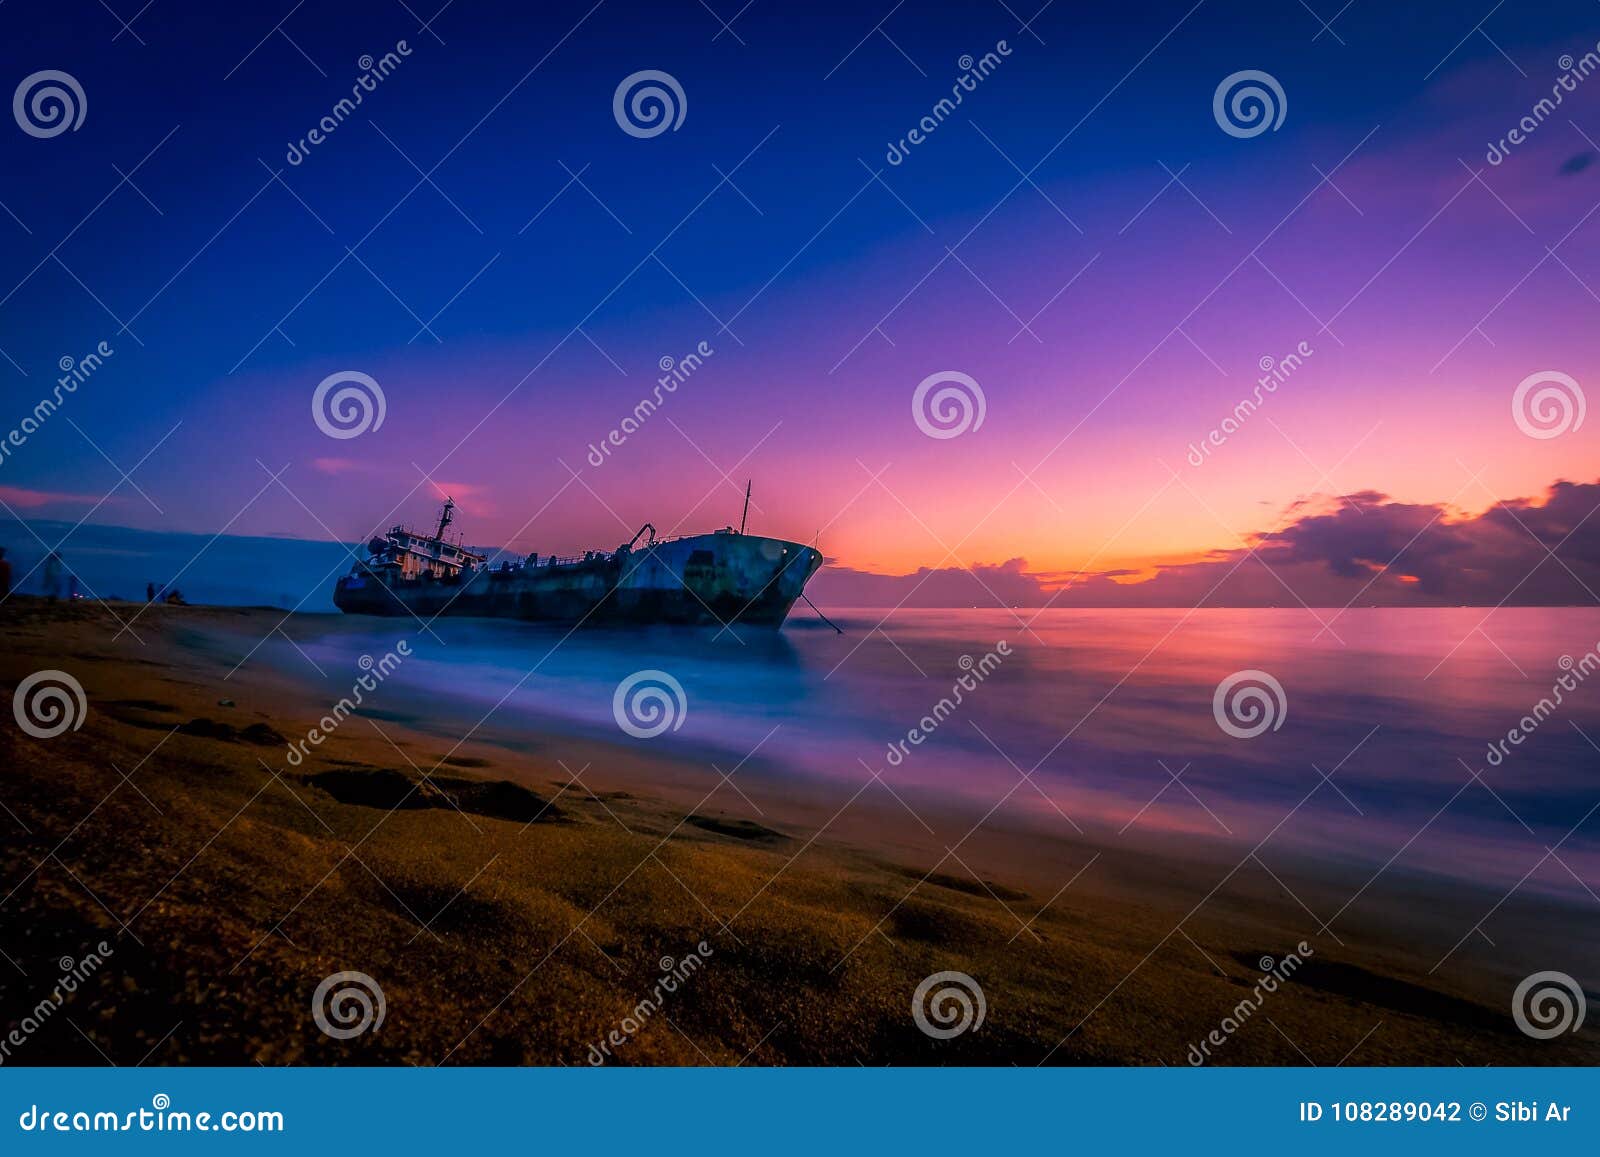 sand trapped ship in kollam beach